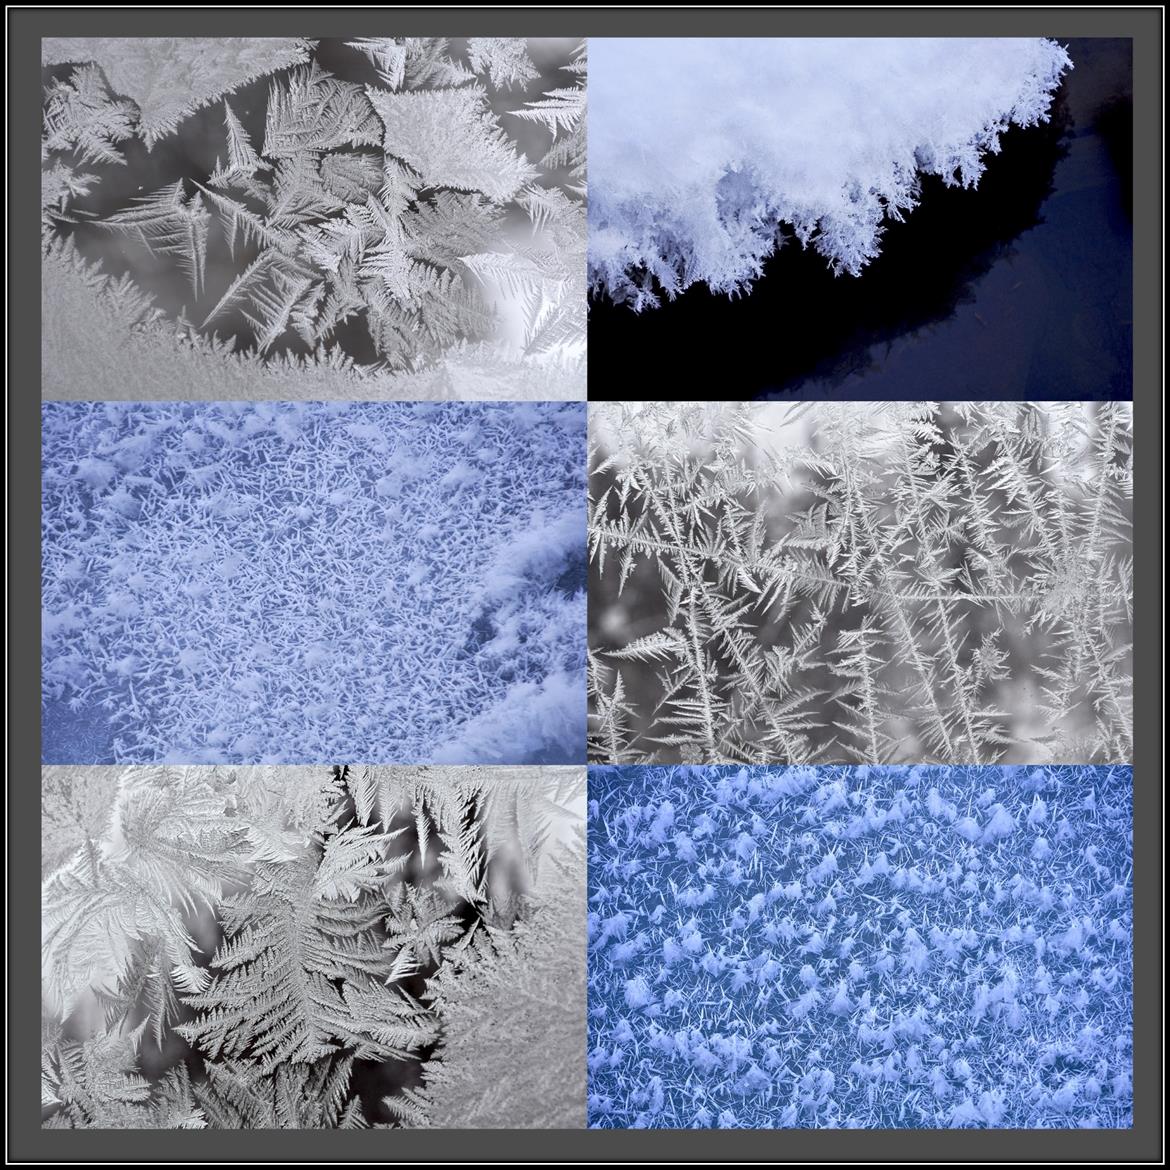 Images of ice crystals